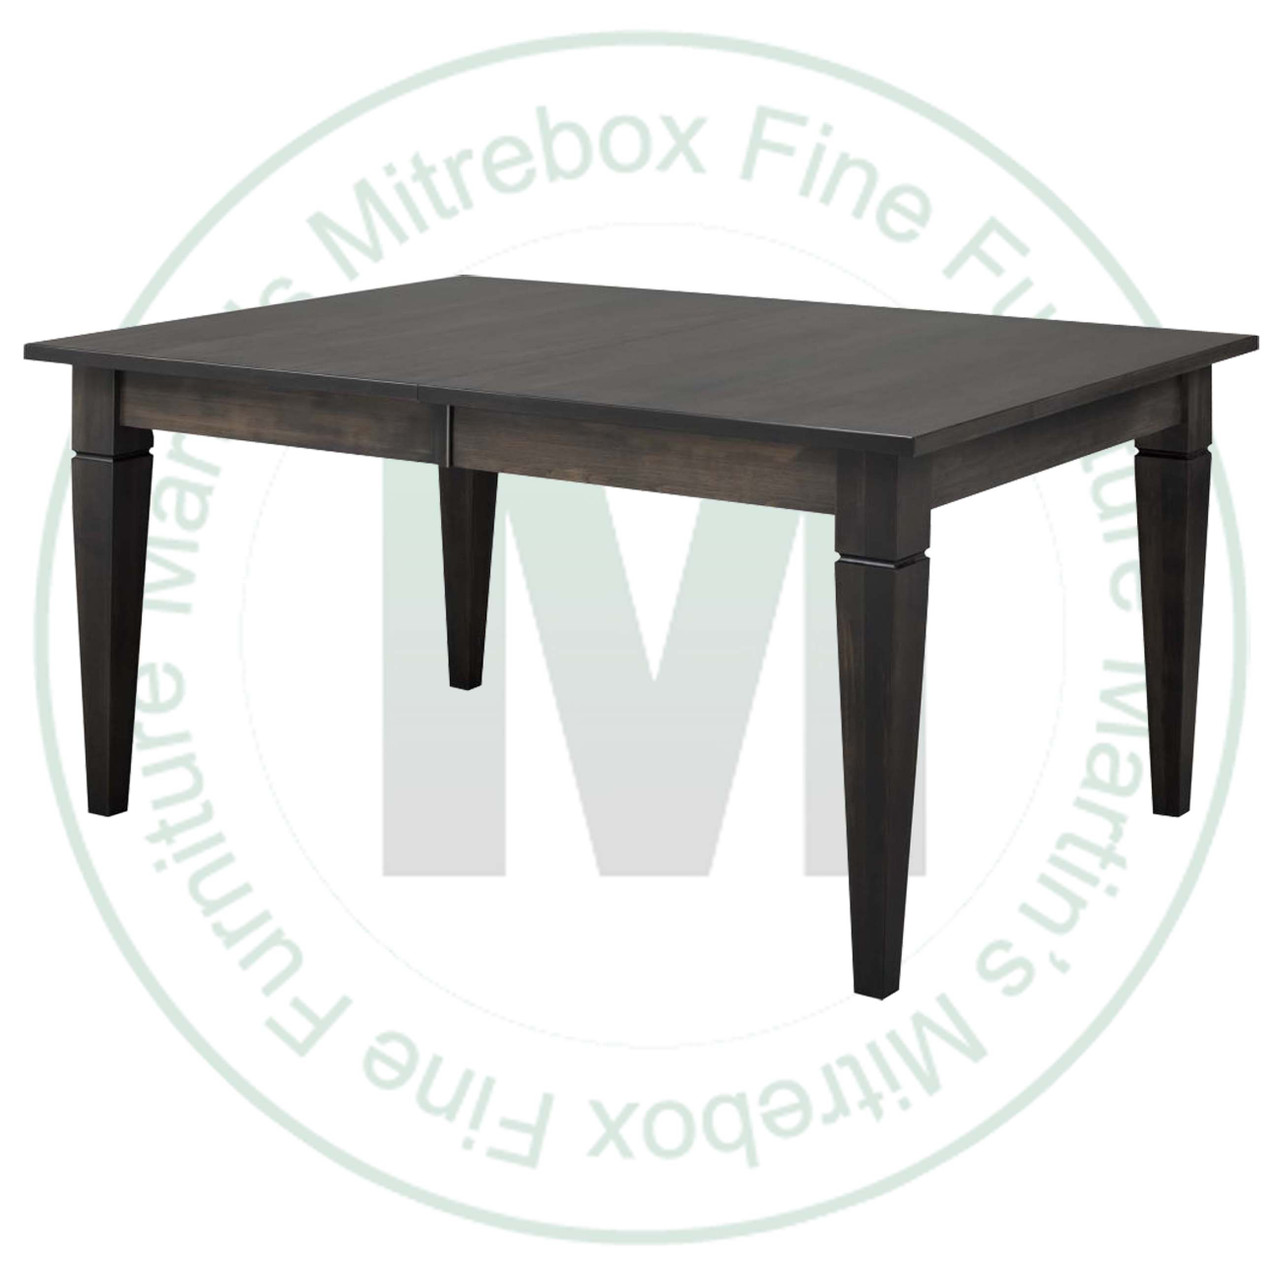 Maple Reesor Solid Top Harvest Table 36''D x 96''W x 30''H Table Has 1 3/4'' Thick Top And 2 - 16'' Extensions